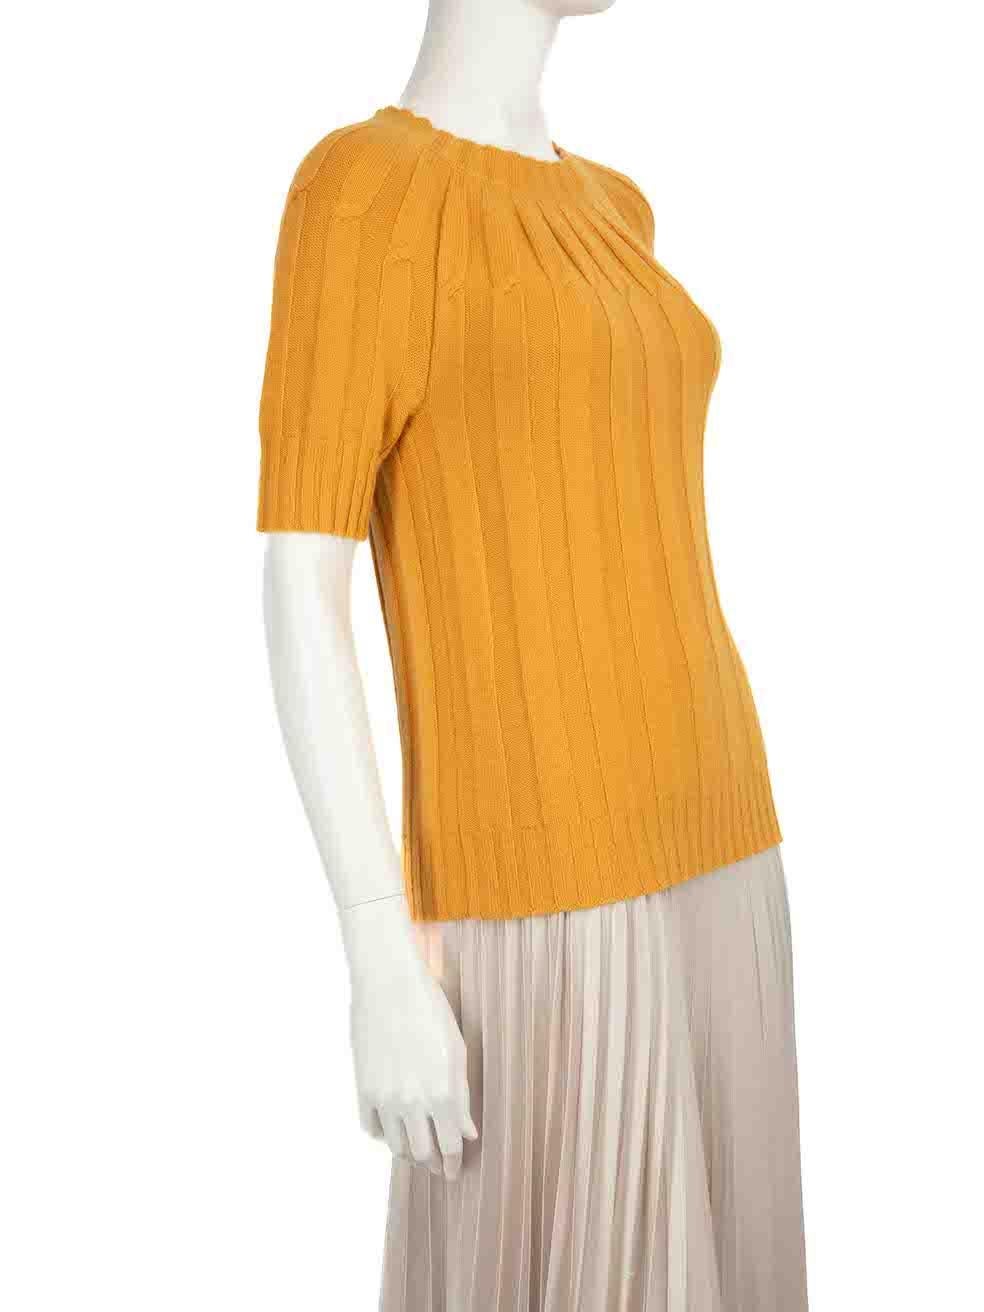 CONDITION is Very good. Hardly any visible wear to jumper is evident on this used Bottega Veneta designer resale item.
 
 
 
 Details
 
 
 Yellow
 
 Cashmere
 
 Cable knit top
 
 Short sleeves
 
 Round neck
 
 
 
 
 
 Made in Italy
 
 
 
